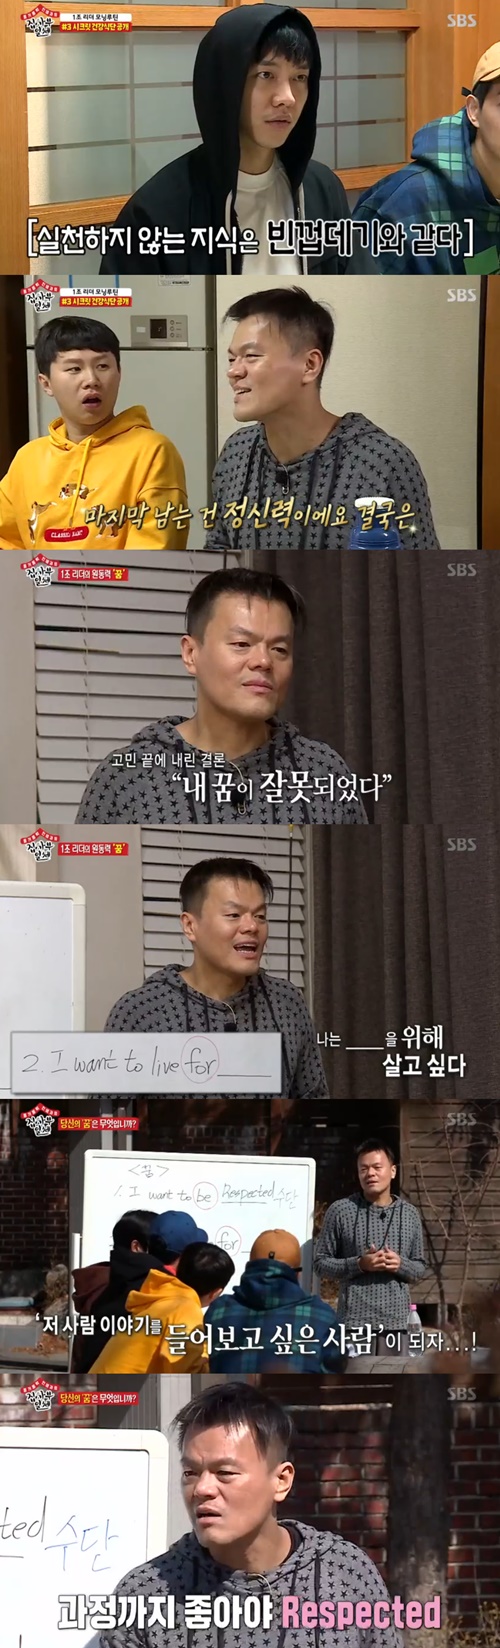 All The Butlers J. Y. Park talks about his dreamJ. Y. Y. In the SBS entertainment program All The Butlers broadcasted on the afternoon of the 17th.Lee Sang-yoon, Lee Seung-gi, Yang Se-hyeong, and Yook Sungjae, who spent a meaningful time with Master Park, were portrayed.J. Y. Park, who was in charge of choreography checks for JYP New Girl Group (ITZY).J. Y. Park, who watched the choreography, pointed out that he was choreographed with a sudden expression and said, There is still something I am sorry for.You know, the most memorable thing I heard from J. Y. Park was truth, sincerity, humility, and J. Y.Park also attracted attention by saying that he had no choice but to see the personality of the trainees.It is not an exaggeration to say that I have been dancing for the rest of my life, but the dance lecture of Master J. Y. Park, the representative dancer of Korea, was held.If you know this, you can dance all the world, the members of the master said, Please let me know soon.But All The Butlers official body (?) Lee Sang-yoon couldnt hide his worrying figure in the corner of the practice room.Lee Seung-gi, Yang Se-hyeong, and Yook Sungjae showed signs of escalation in J. Y. Parks body escape choreography education.On the other hand, dance sub-member Lee Sang-yoon was dispirited, and J. Y. Park, who discovered it, started 1:1 personalized training for Lee Sang-yoon.As Lee Sang-yoons body began to take a little rhythm in the eye-level lesson of the Dancing Master, the members who watched were surprised as if a miracle had occurred.J. Y. Park, who later returned home, unveiled an empty wardrobe; J. Y. Park, who was also a waste of time to pick clothes, said, I spent only two clothes in winter.Shopping is only twice a year, he surprised the members.The next day, J. Y. Park woke up in Japanese, preparing a special breakfast for the members who were tired of long fasting, but Masters breakfast was not rice.J. Y. Park, who practices meals one day, eats official meals only at lunch and takes nutrients in the morning.All kinds of nutrients, nuts, lactic acid bacteria, fruits, and olive oil filled with whiskey glasses. J. Y. Park was surprised to find that I have been eating breakfast for over 20 years.Lee Seung-gi asked, Can I disclose my assets that I have accumulated for over 20 years? J. Y. Park said, You can tell me the JYP manual and the diet.The last thing left is mental strength, he said. Knowledge that does not practice is like an empty shell.After breakfast, the members went on a vocal practice with J. Y. Park.The master was a one-on-one coach with the members 18th karaoke song, and he caught the eye by telling him how to become a karaoke nucleus.In particular, he also encouraged confidence in Lee Sang-yoon, who had a fear of singing.Finally, J. Y. Park spoke about why he had lived like a bad man: The best purpose of my life was to make two billion dollars, and I earned it at the age of 25.The dream ended, and I had the next dream of making K-pop the first American, but the Lehman incident caused me to cancel all the money and time I had devoted for five years.I asked myself why I could not even get a chance, but my dream was wrong. The master said, When a dream of what I will be is achieved, it is empty and sad if it is not done. This is not the answer.I have to find something value that will devote my whole life to my life, not location. J. Y. Park said of his dream: I wanted to succeed, so I succeeded, but I was lonely, lonely, and empty.The process as well as the result should be good. After the value of being a person who wants to listen to that persons story, the futility has disappeared. On this day, J. Y. Park lived a more successful life than anyone else, but he had a difficult time because of the vanity that came after his success.He said, Dreams are not a location, but a value. He said that his dream was not a success but a respect.J. Y. Parks heartfelt story, which has been a waste of less than a minute and a second, has left a heavy lull to members and viewers.Photo SBS broadcast screen capture